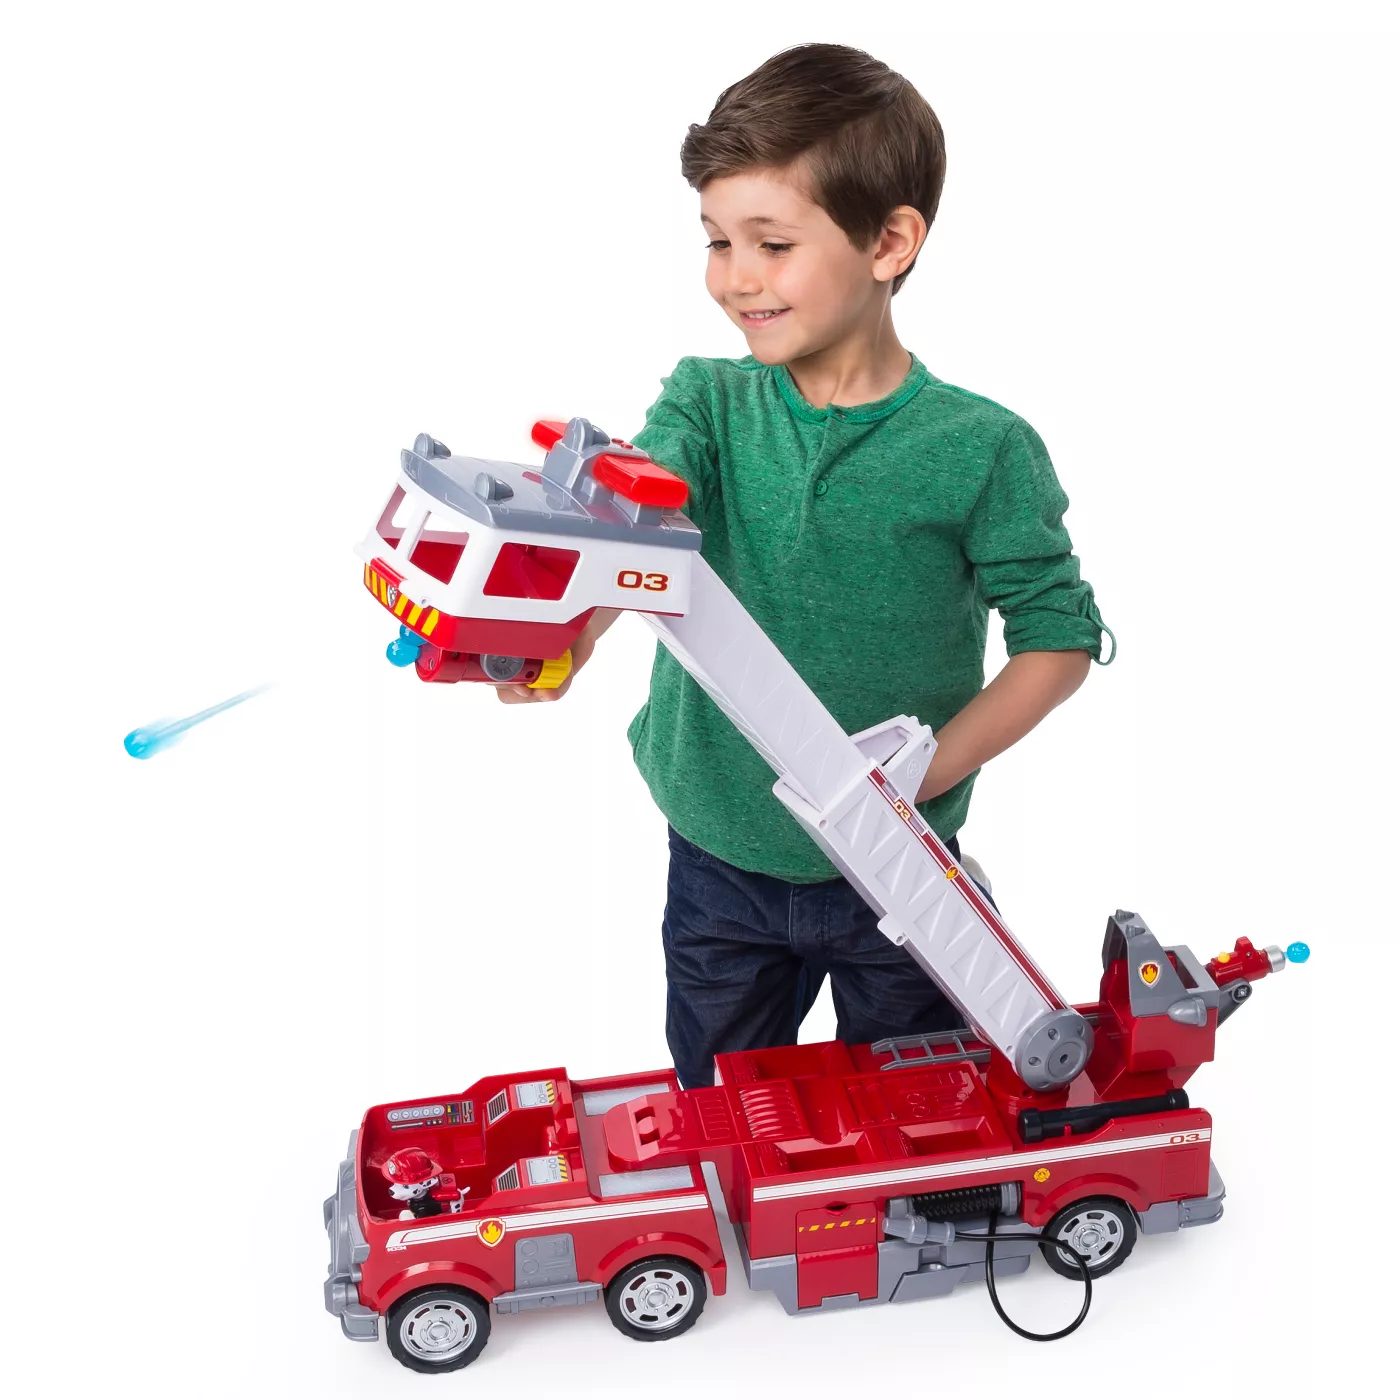 PAW Patrol Ultimate Fire Truck ONLY $22.49 at Target (Reg $60)